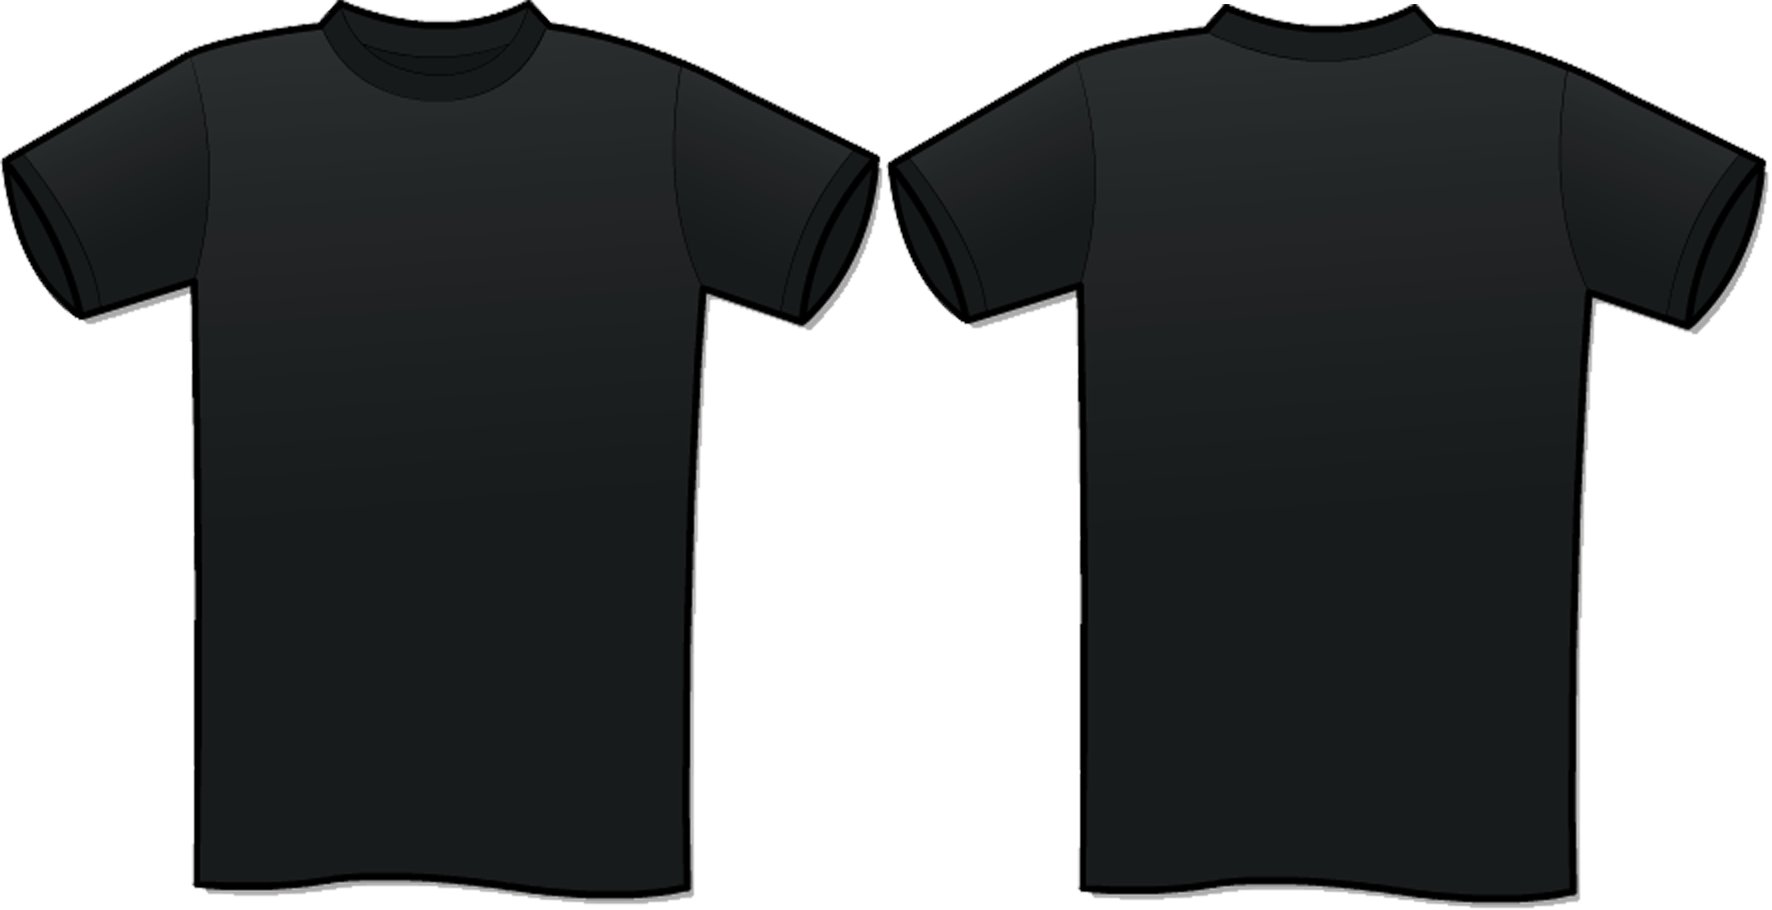 Photoshop Template For T Shirt Design